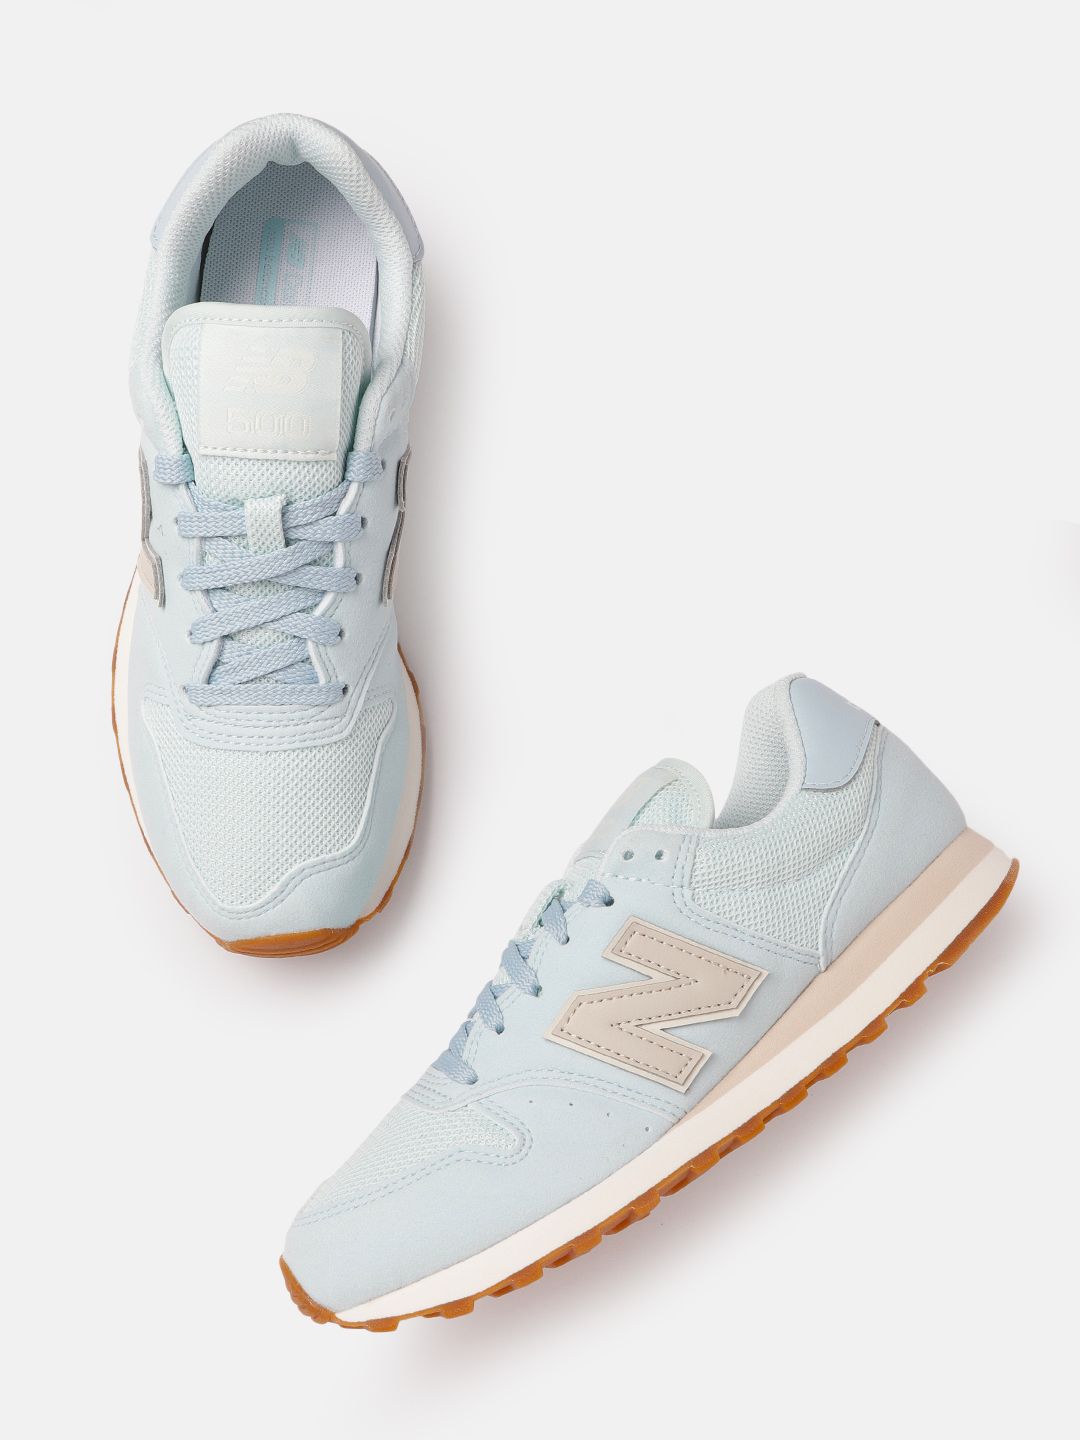 New Balance Women Blue Woven Design Suede Sneakers Excluding Trims Price in India